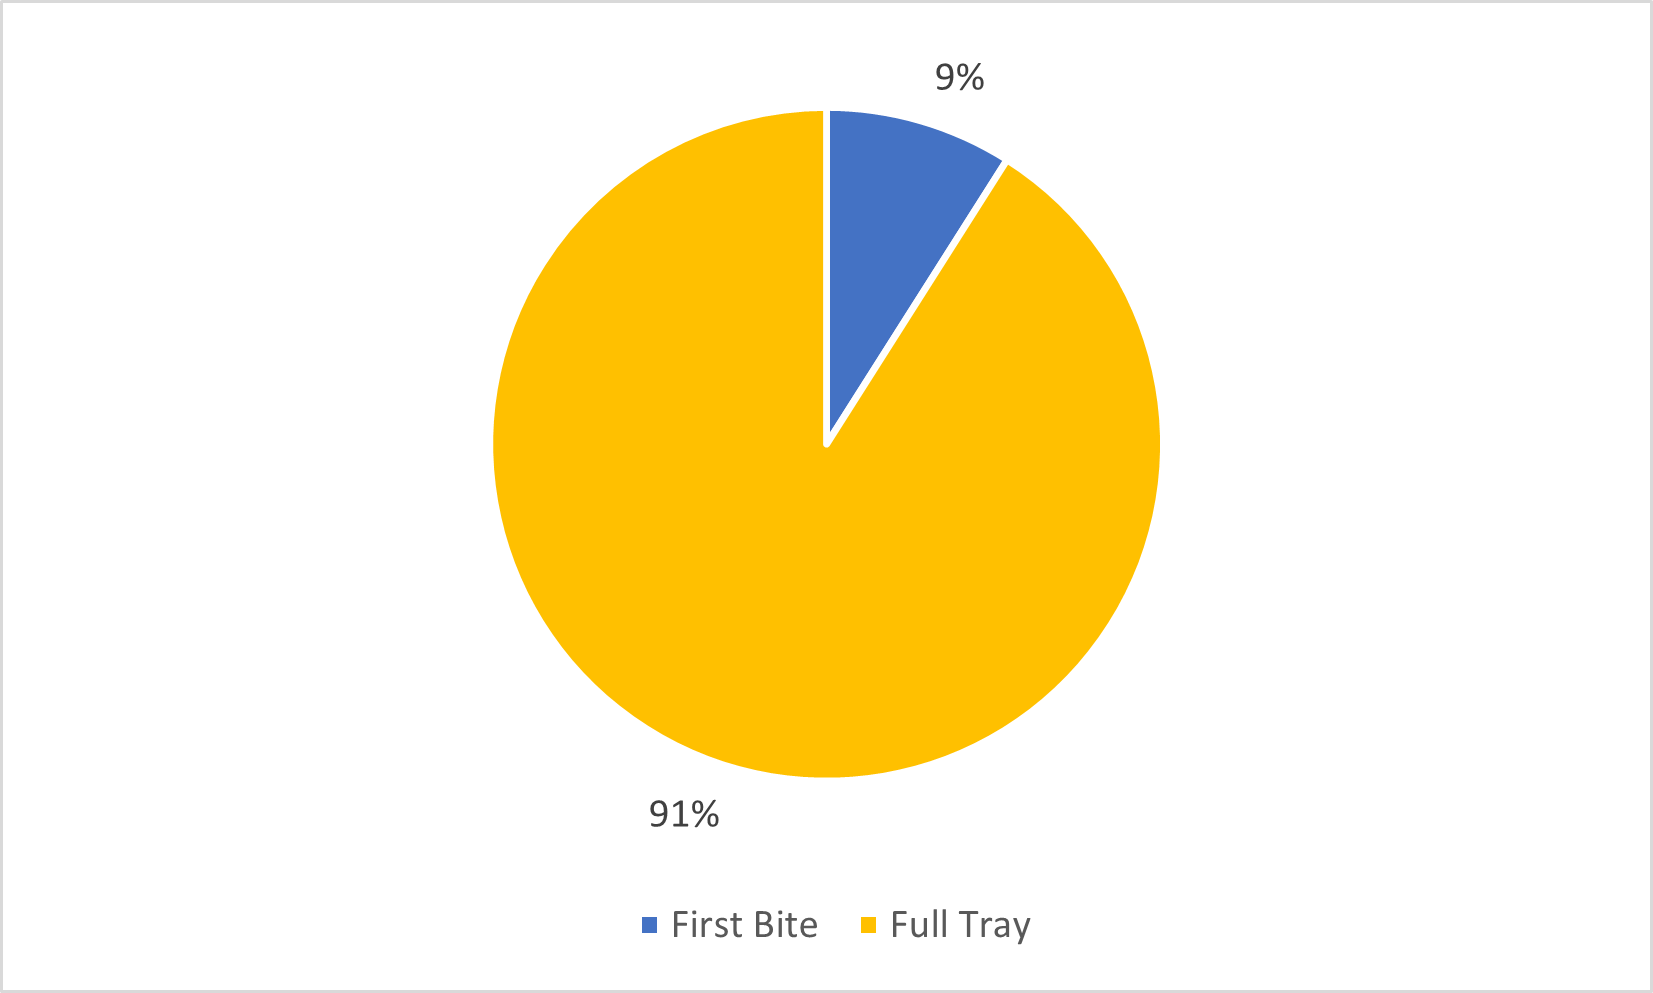 Pie chart showing 91% of grant funding went to Full Tray grants, 9% to First Bite grants